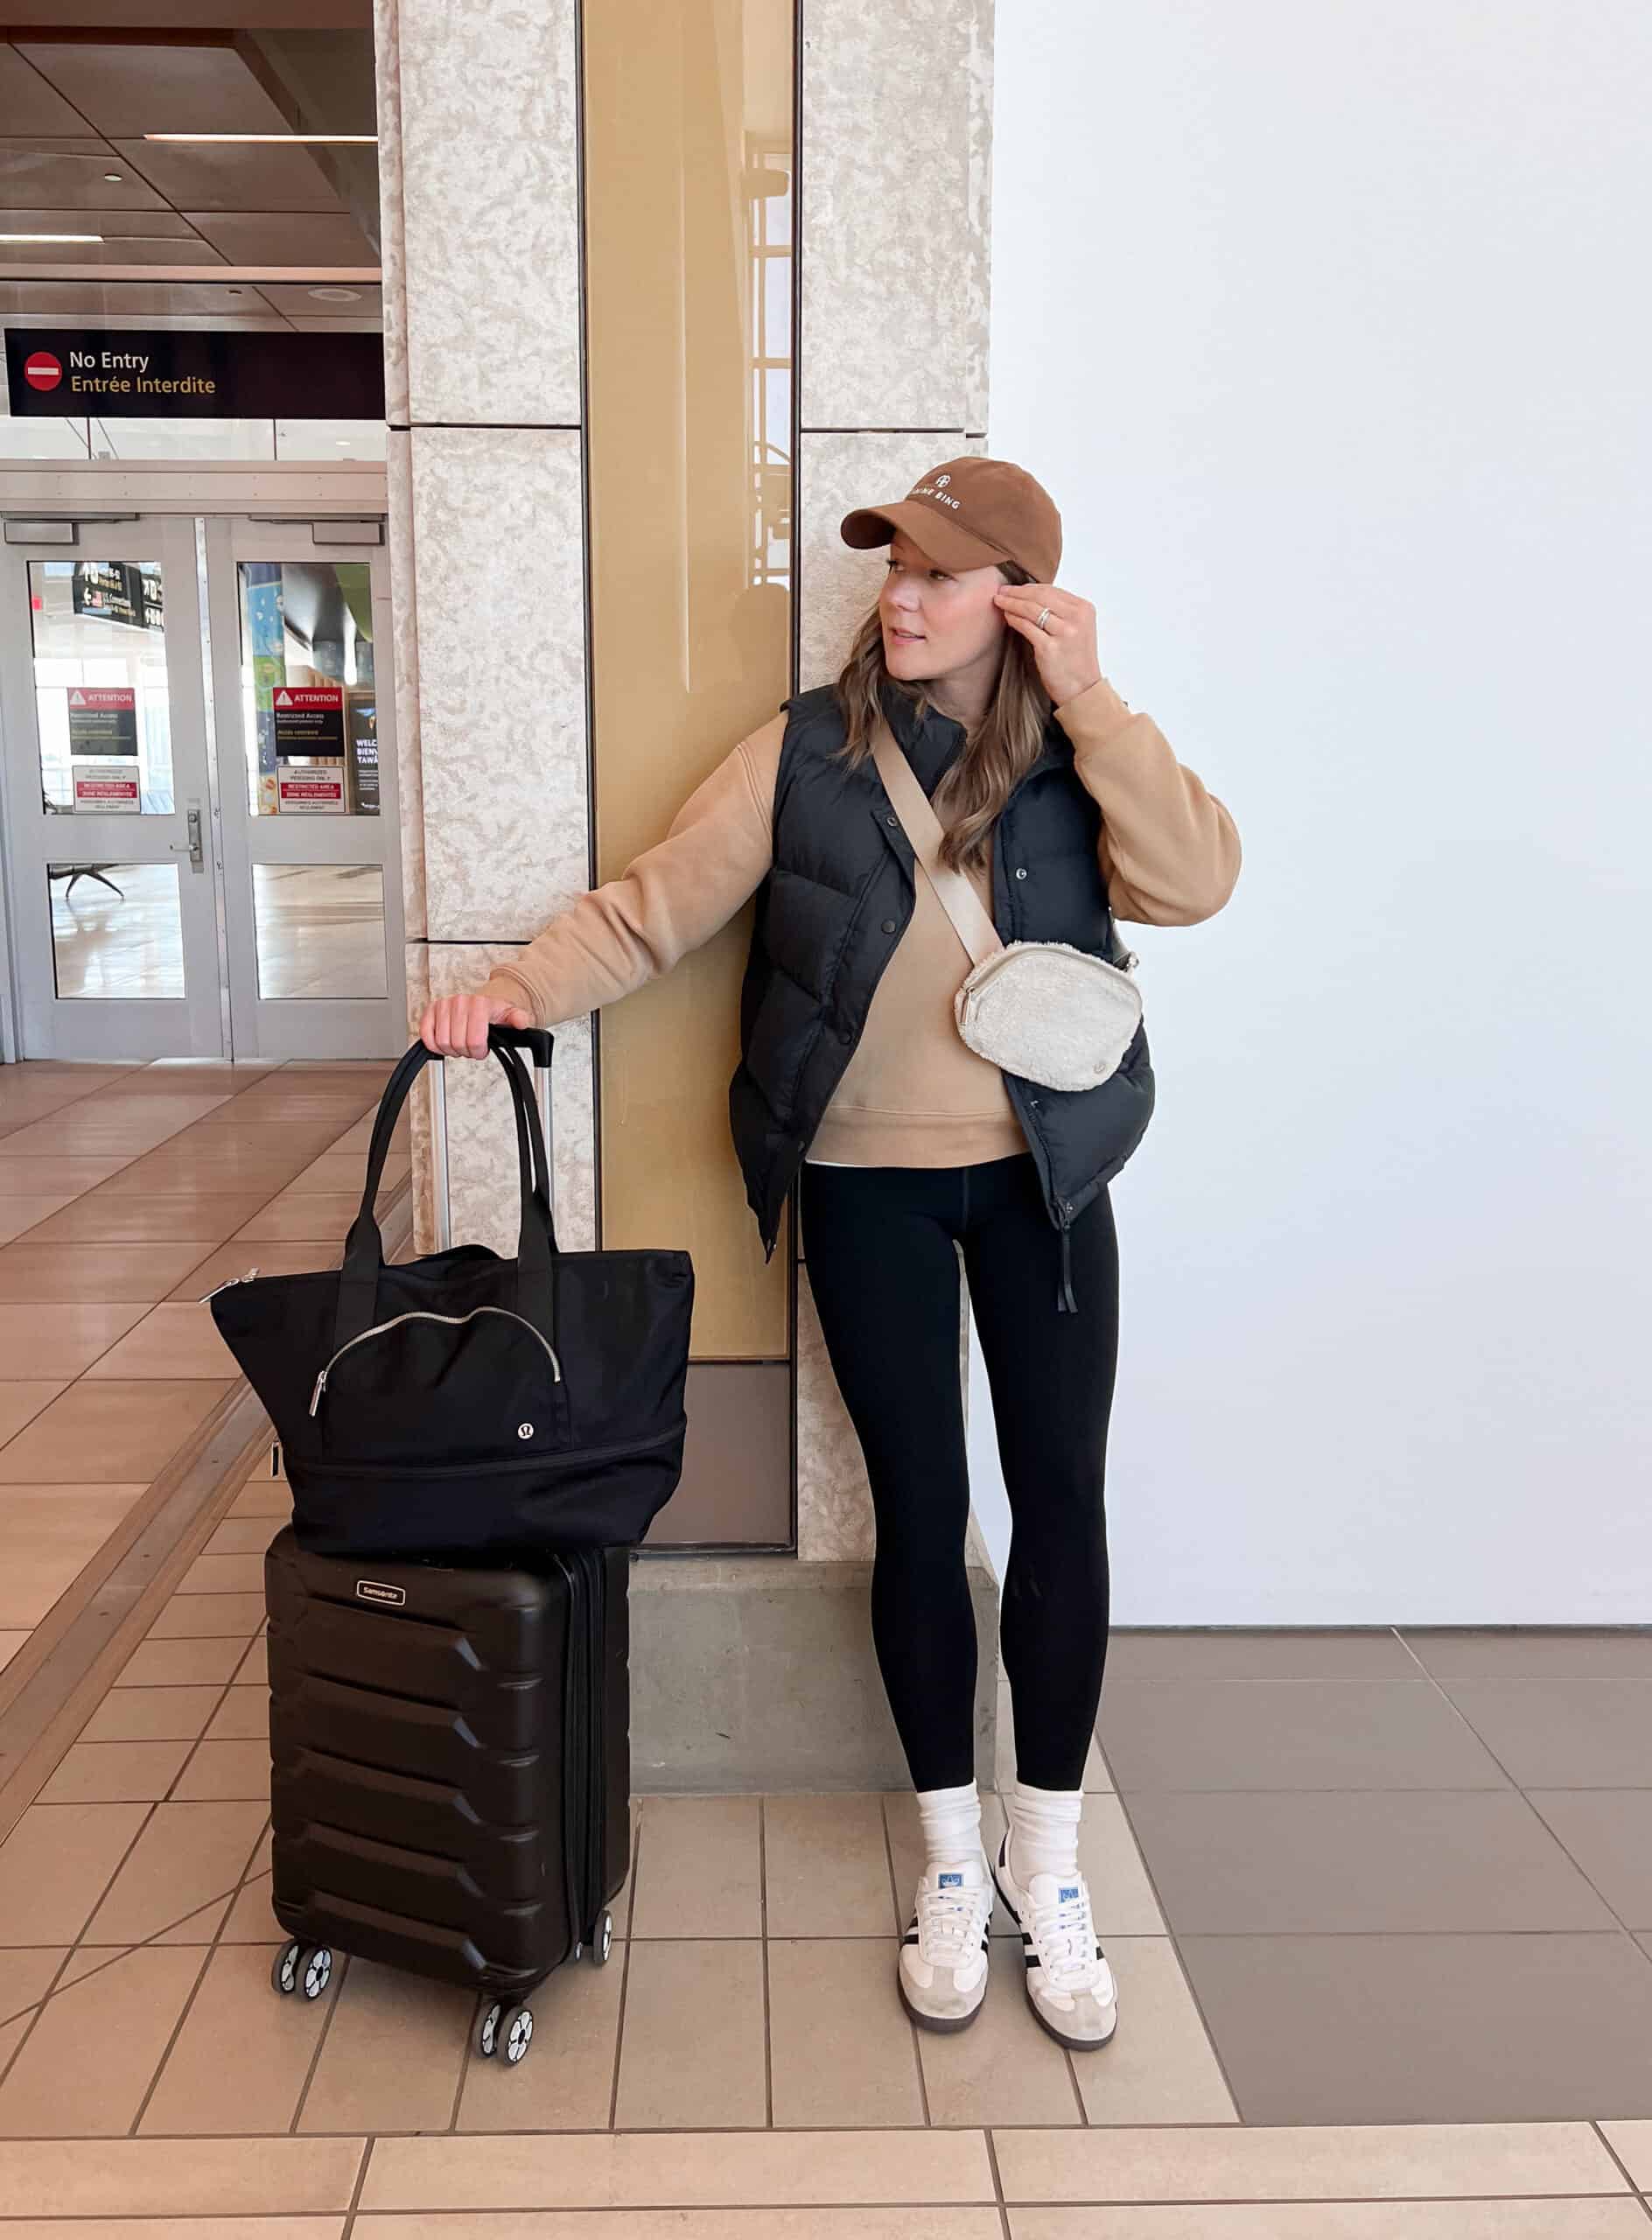 Christal wearing black leggings, a tan sweatshirt and a black puffer vest in the airport.